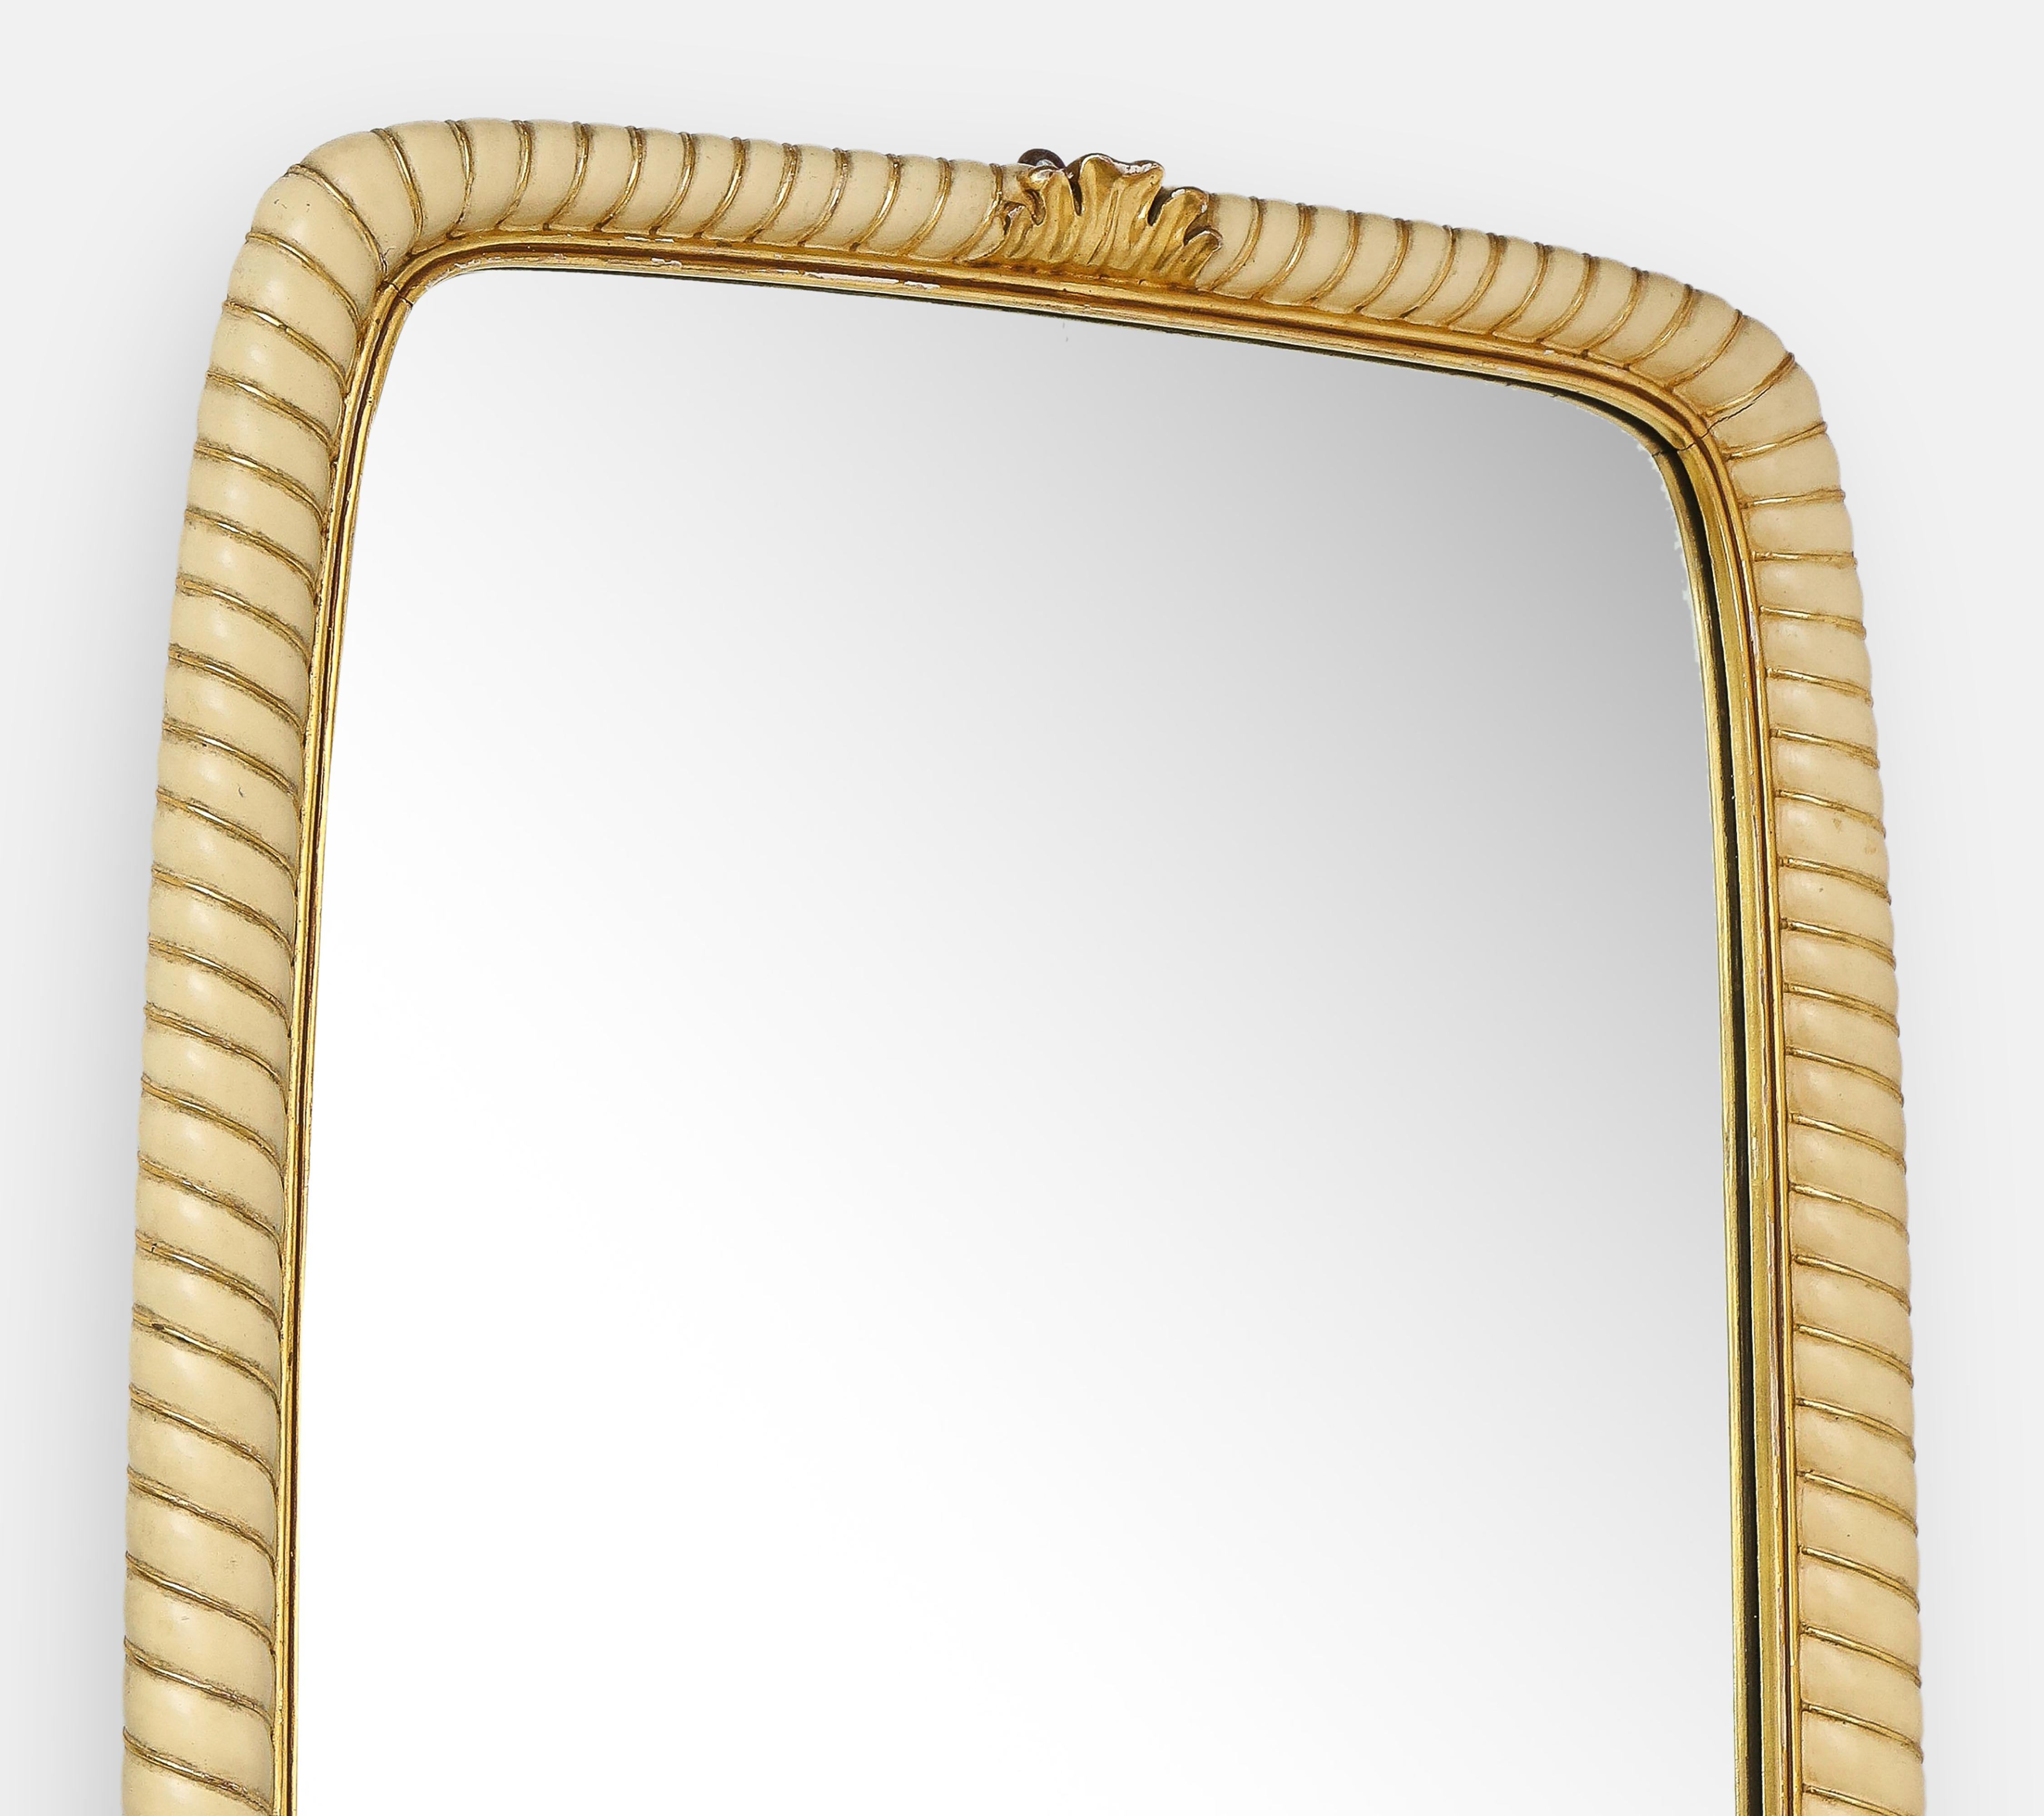 Hand-Carved Osvaldo Borsani Rare Large Ivory Painted and Gilded Wood Mirror, Italy, 1940s For Sale